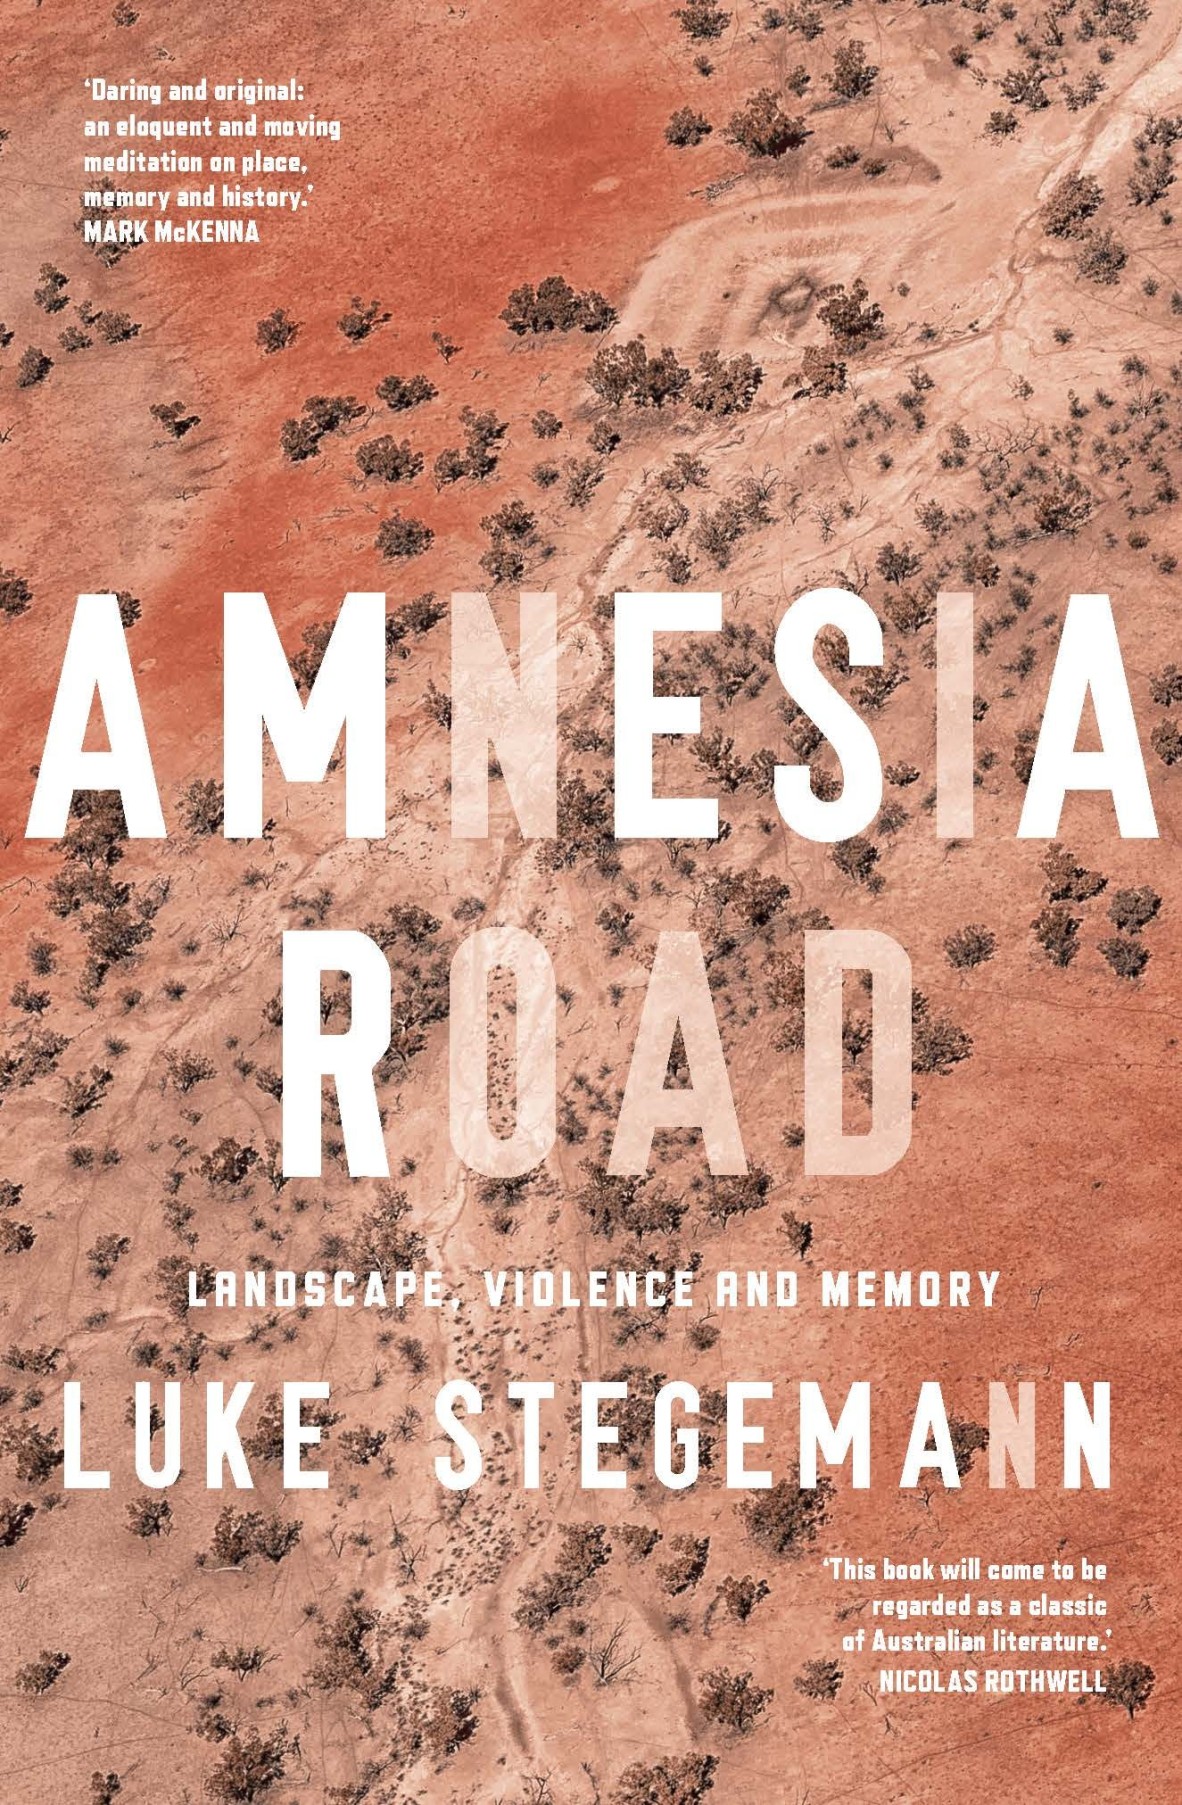 The cover of Amnesia Road by Luke Stegemann - An aerial view of red and brown dirt with creek beds and some trees